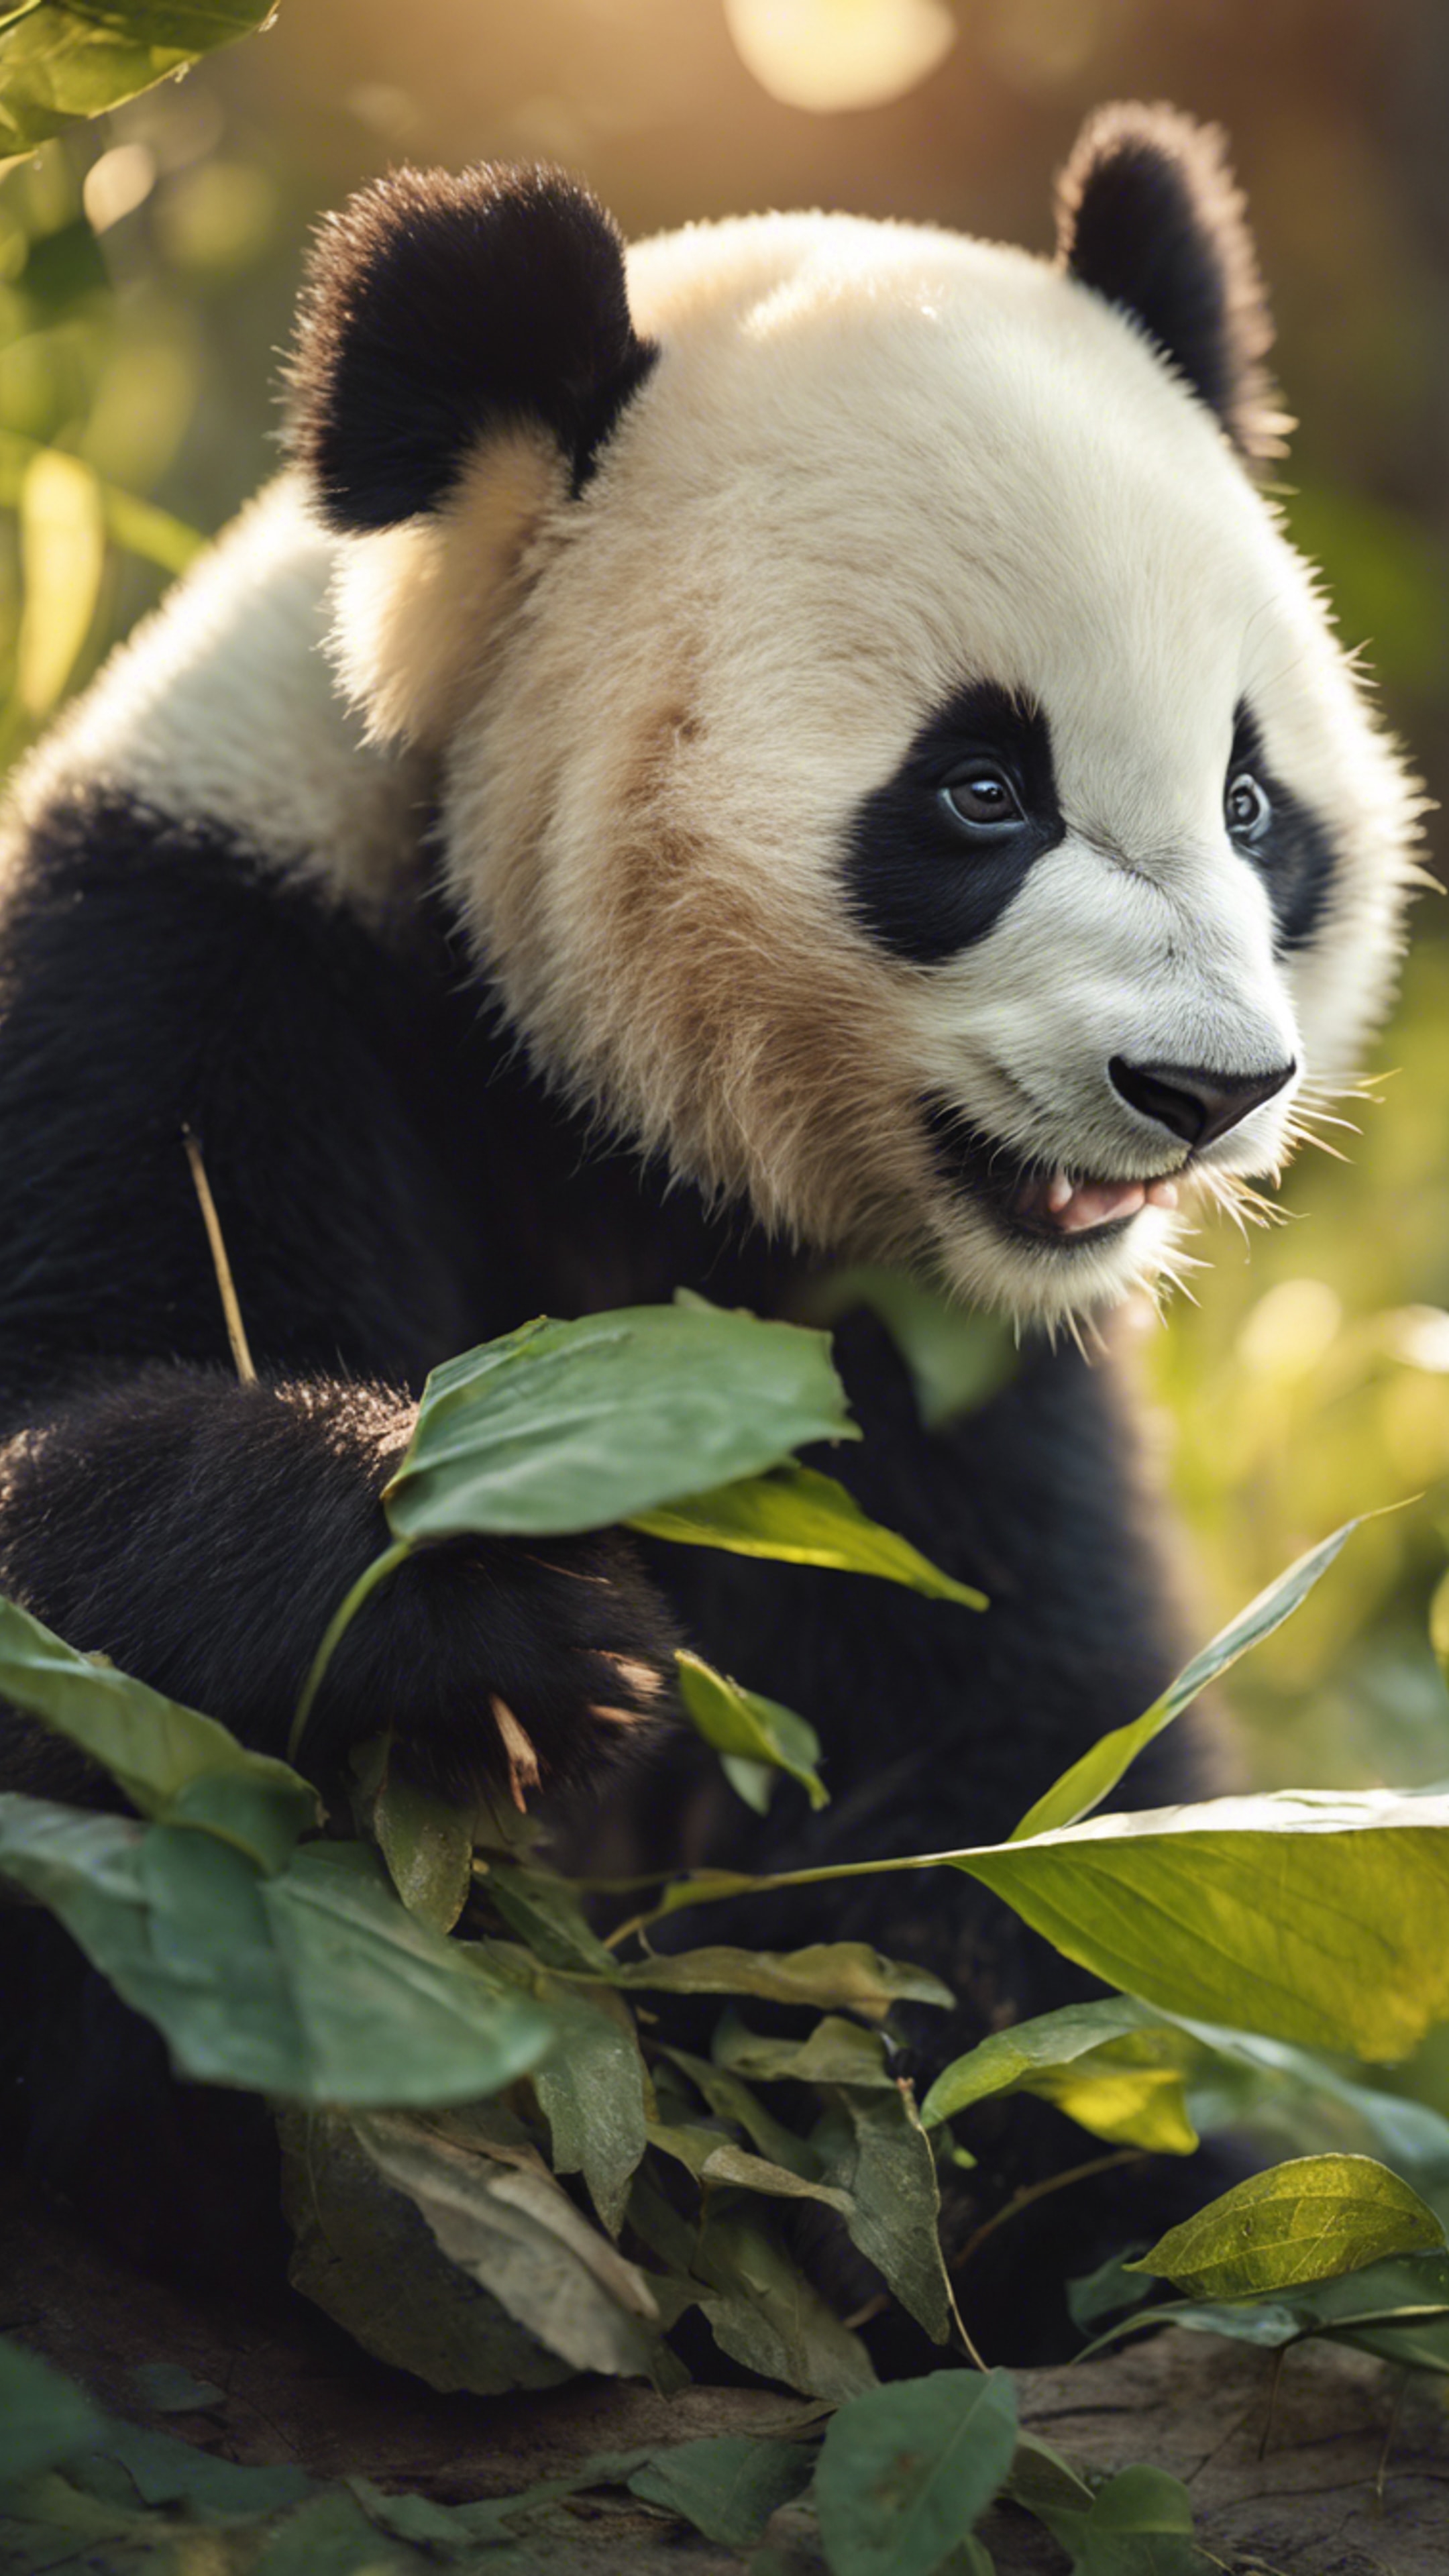 A young panda bear adorably nibbling on a leaf in the soft glow of morning light. 墙纸[df98dc8ca776441d85bc]